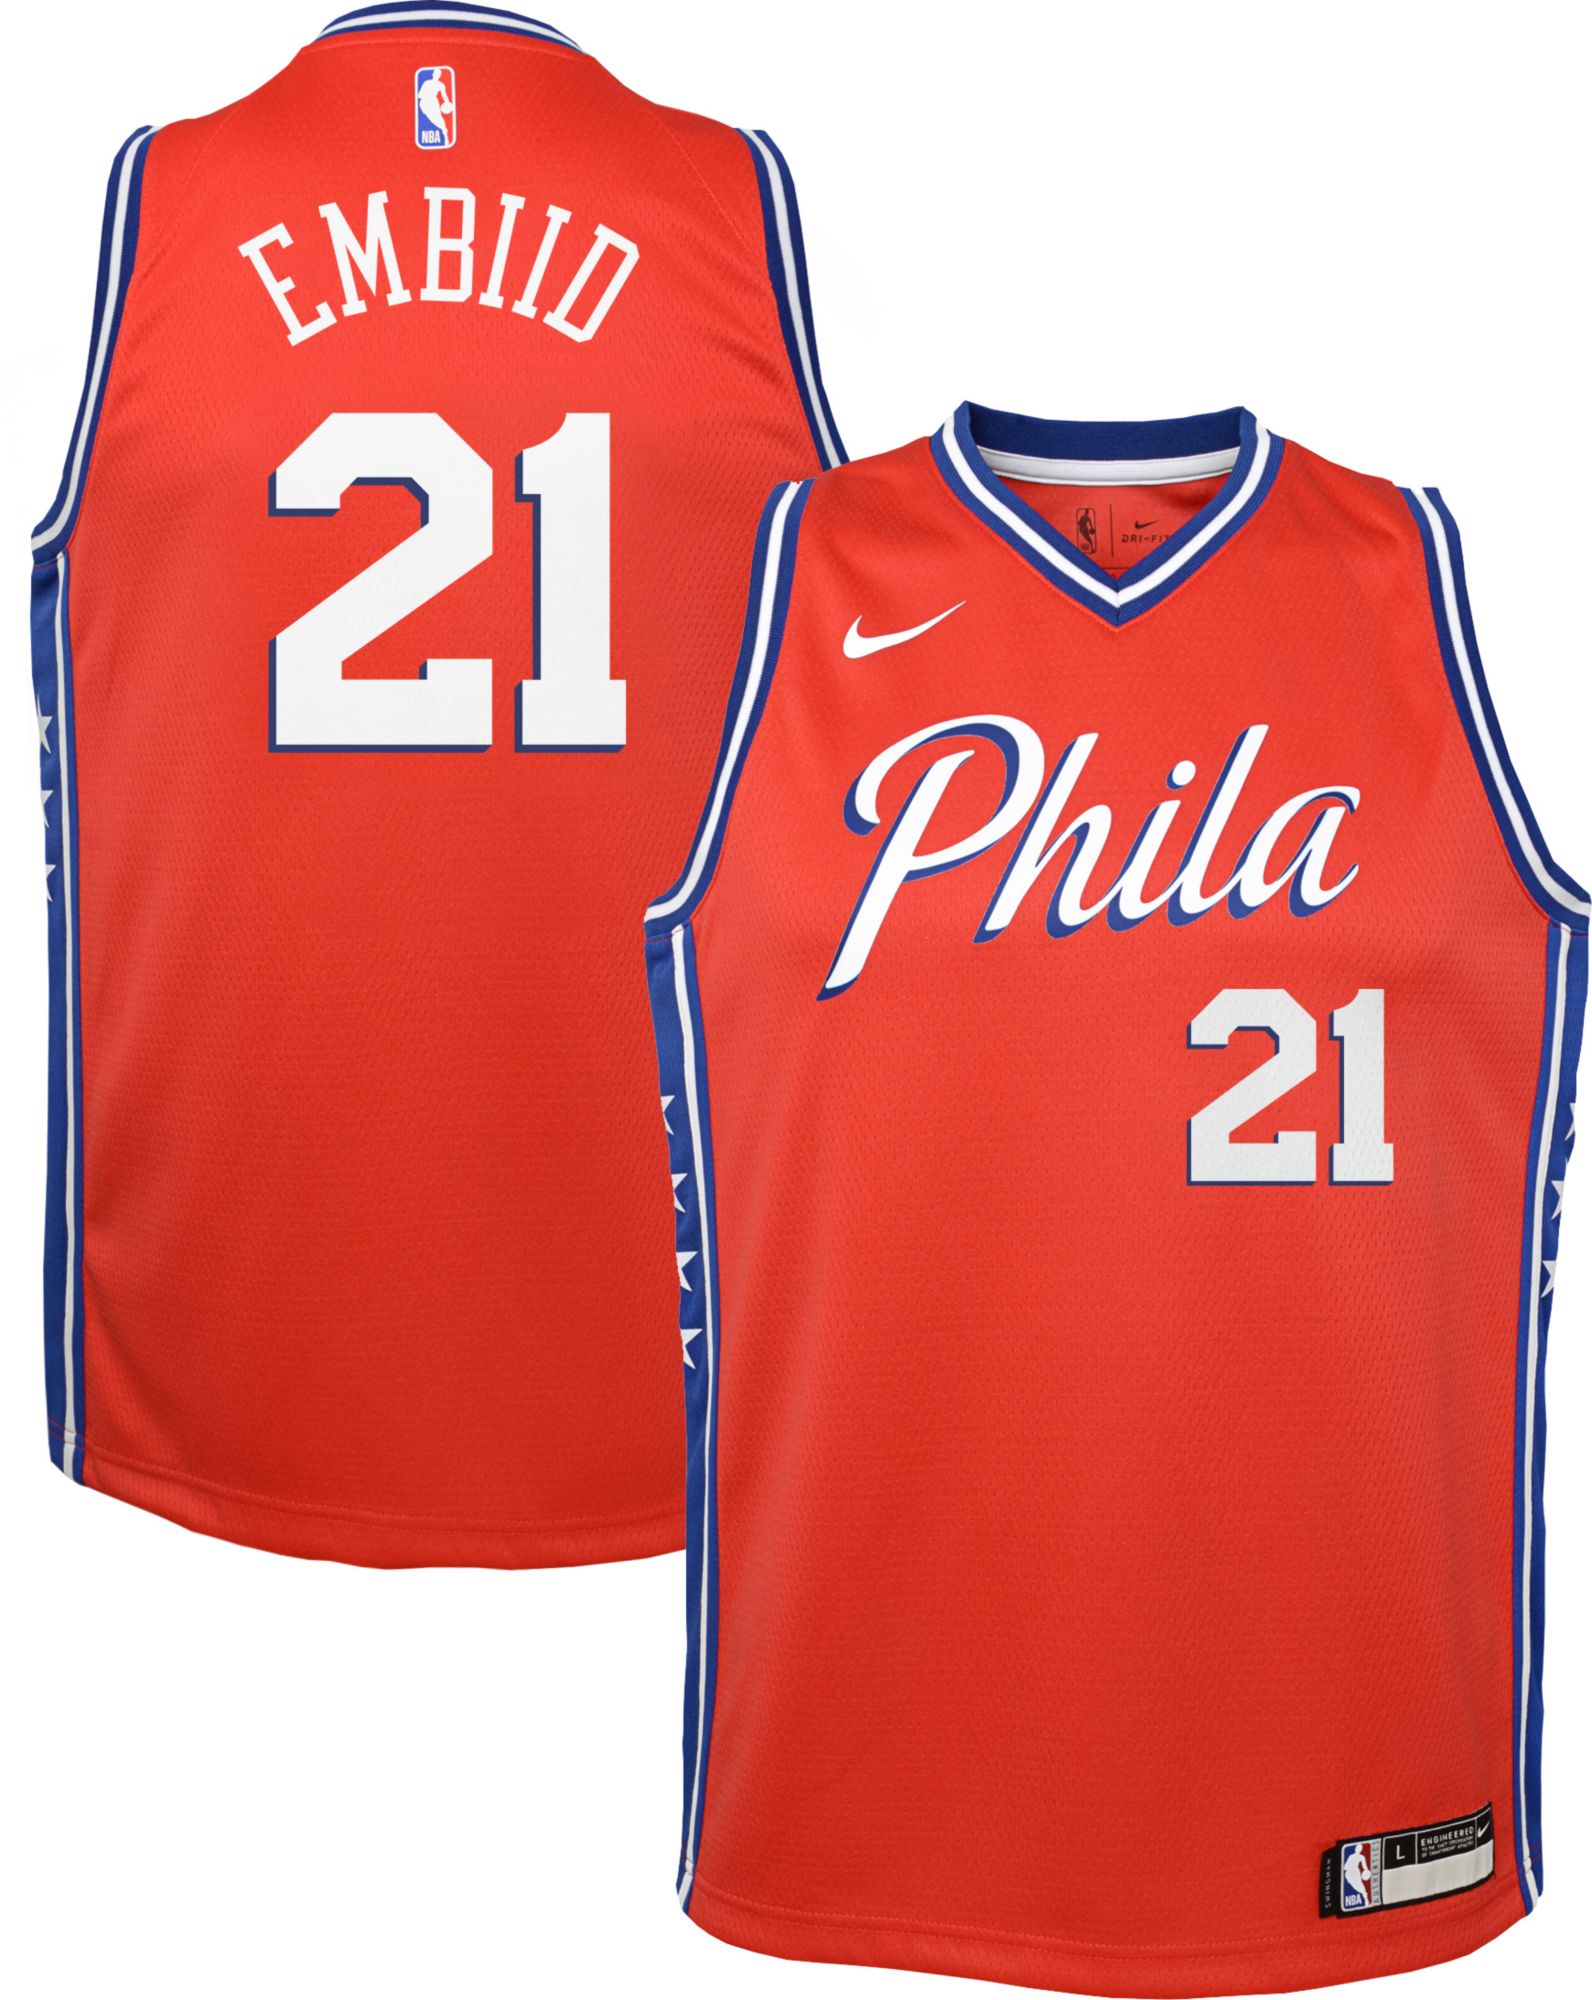 red 76ers jersey